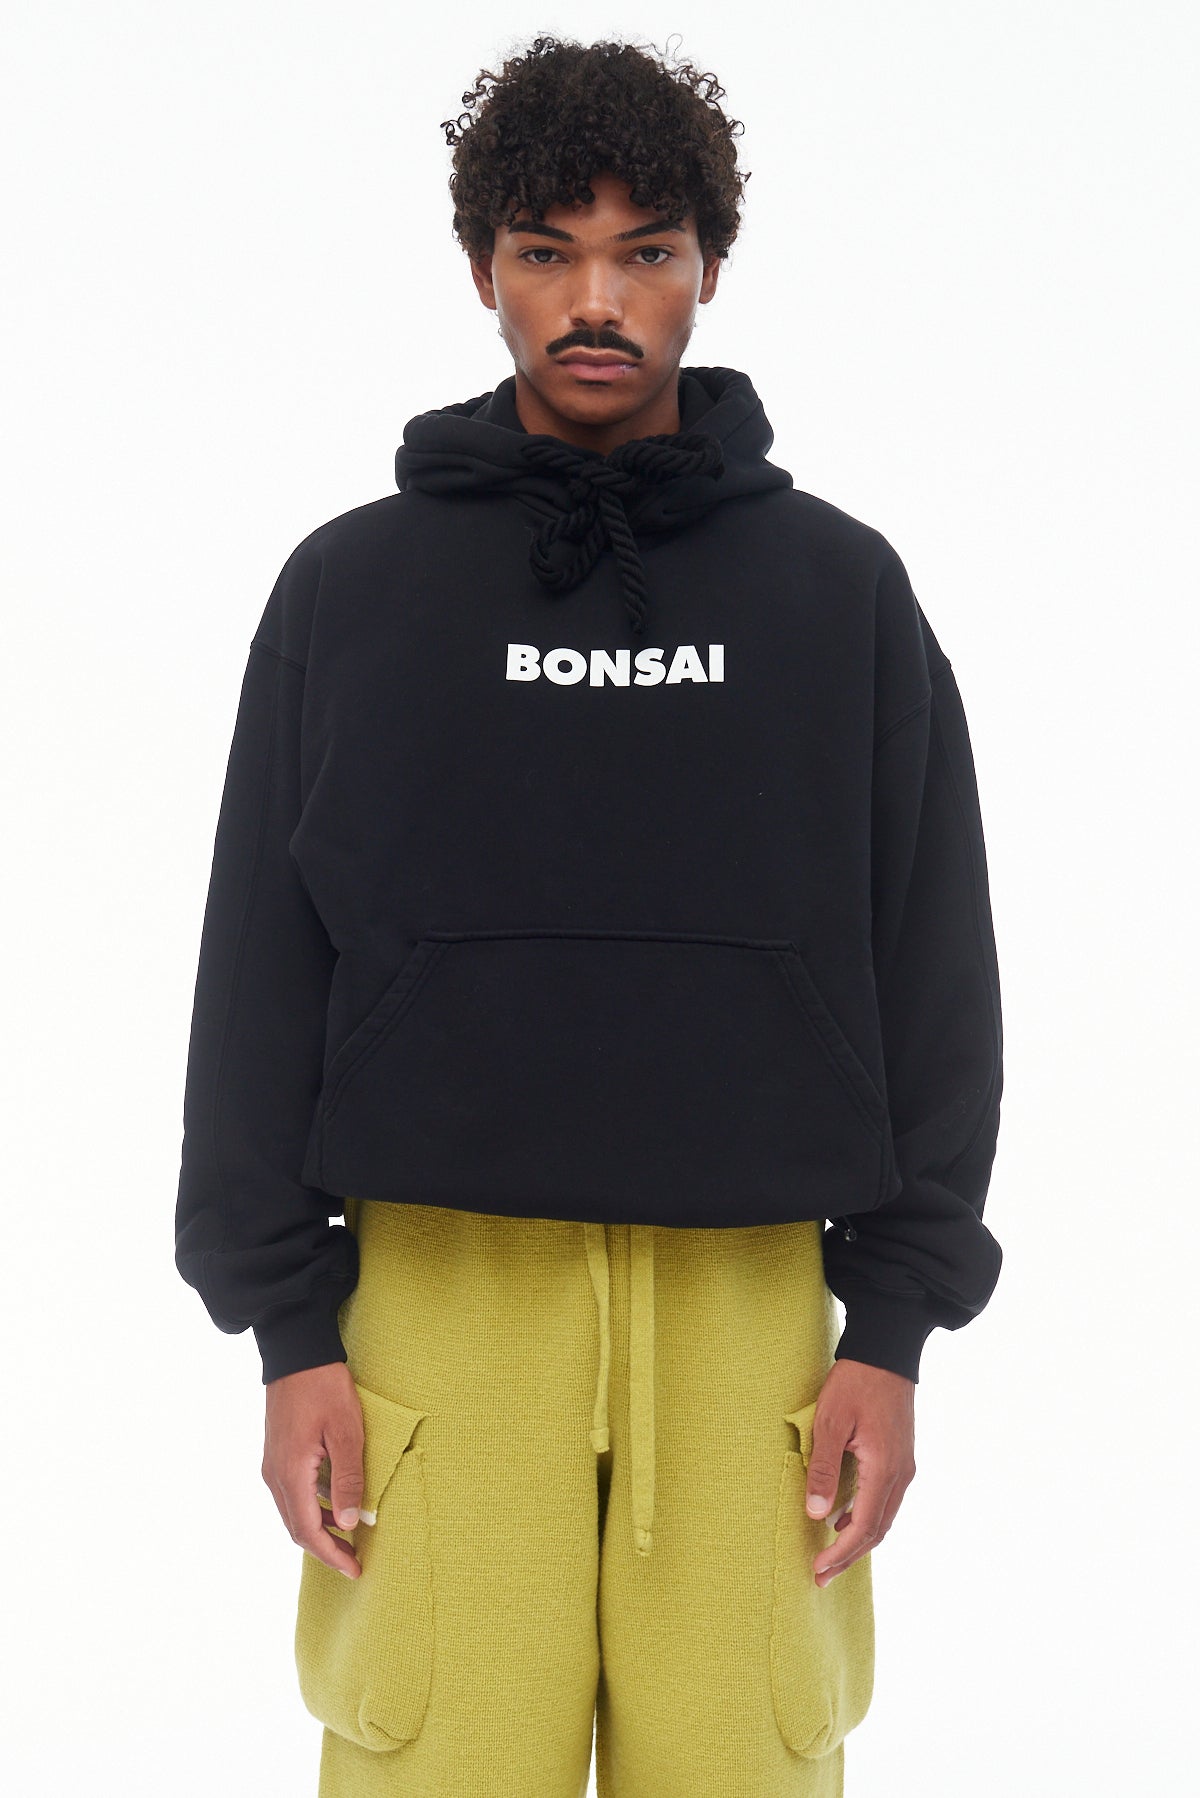 BOX LOGO HOODIE-UP TO 70% OFF